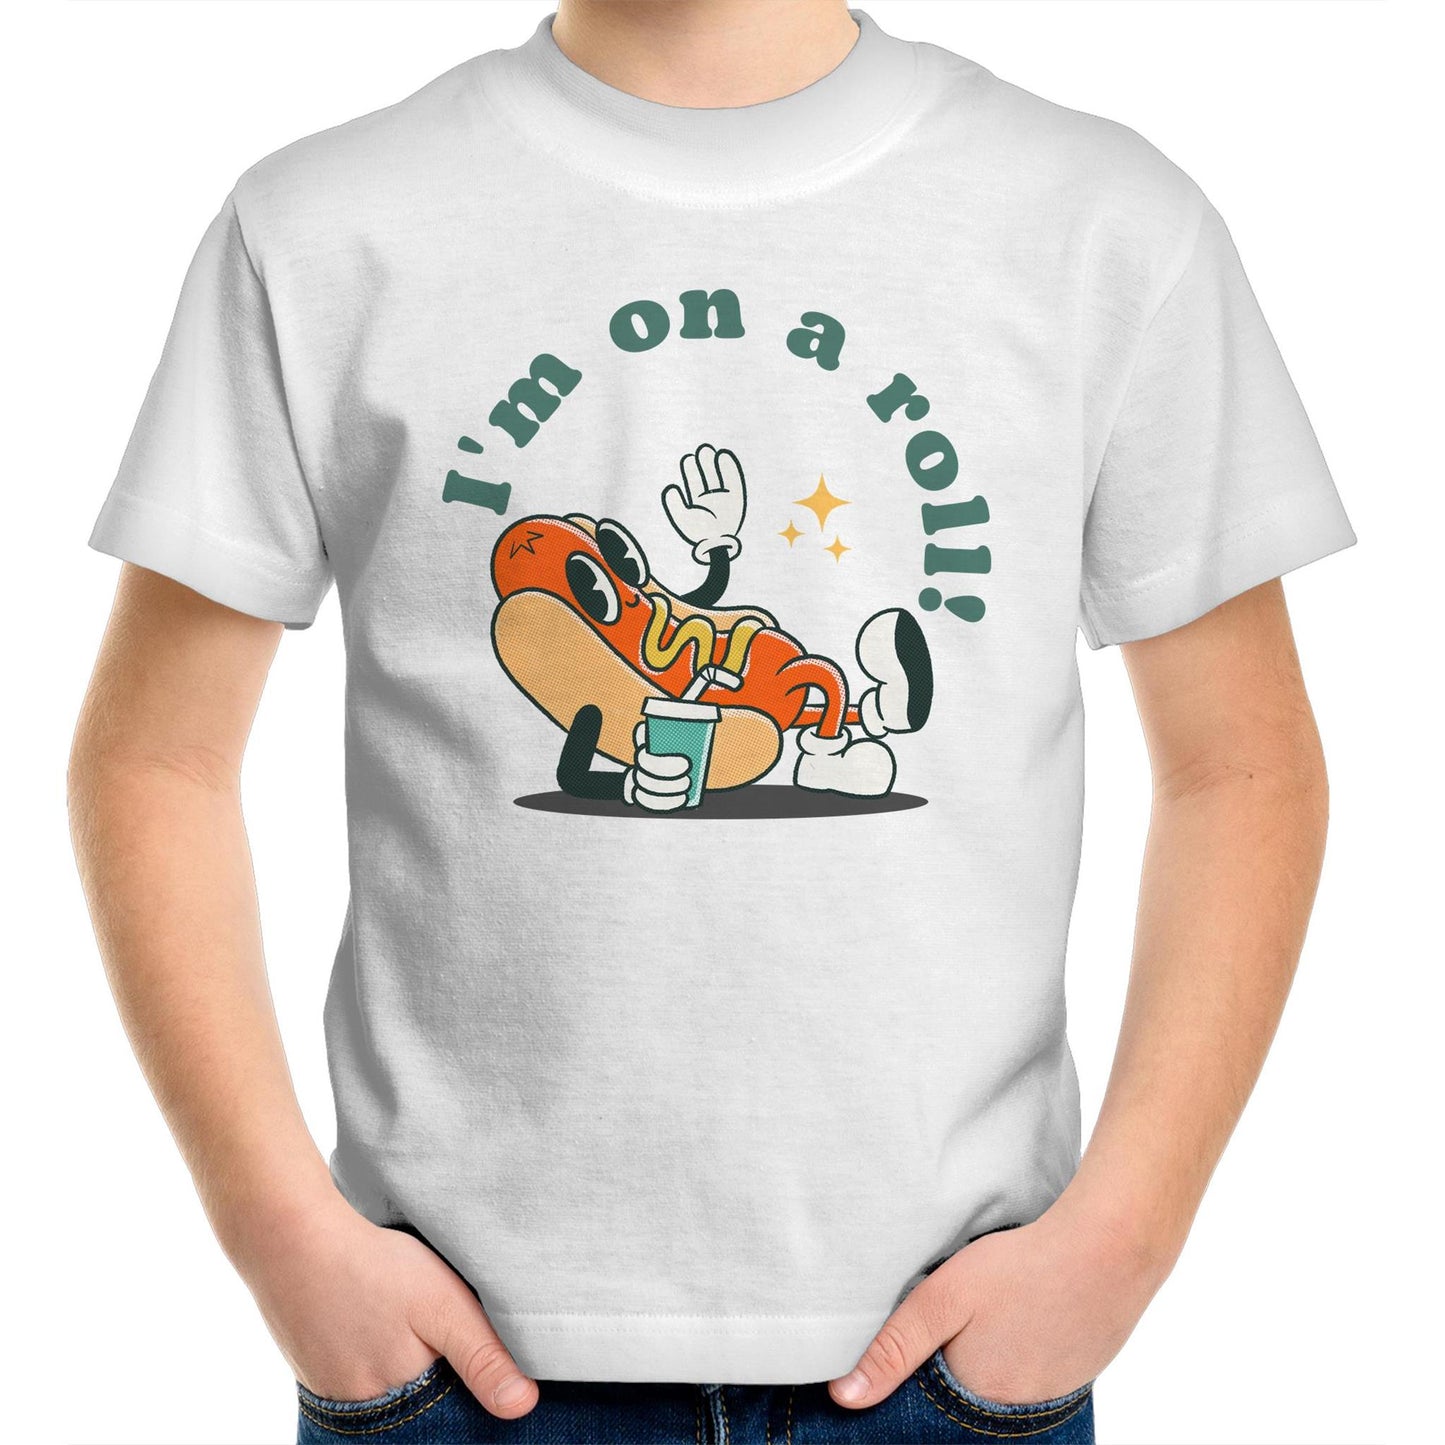 Hot Dog, I'm On A Roll - Kids Youth T-Shirt White Kids Youth T-shirt Food